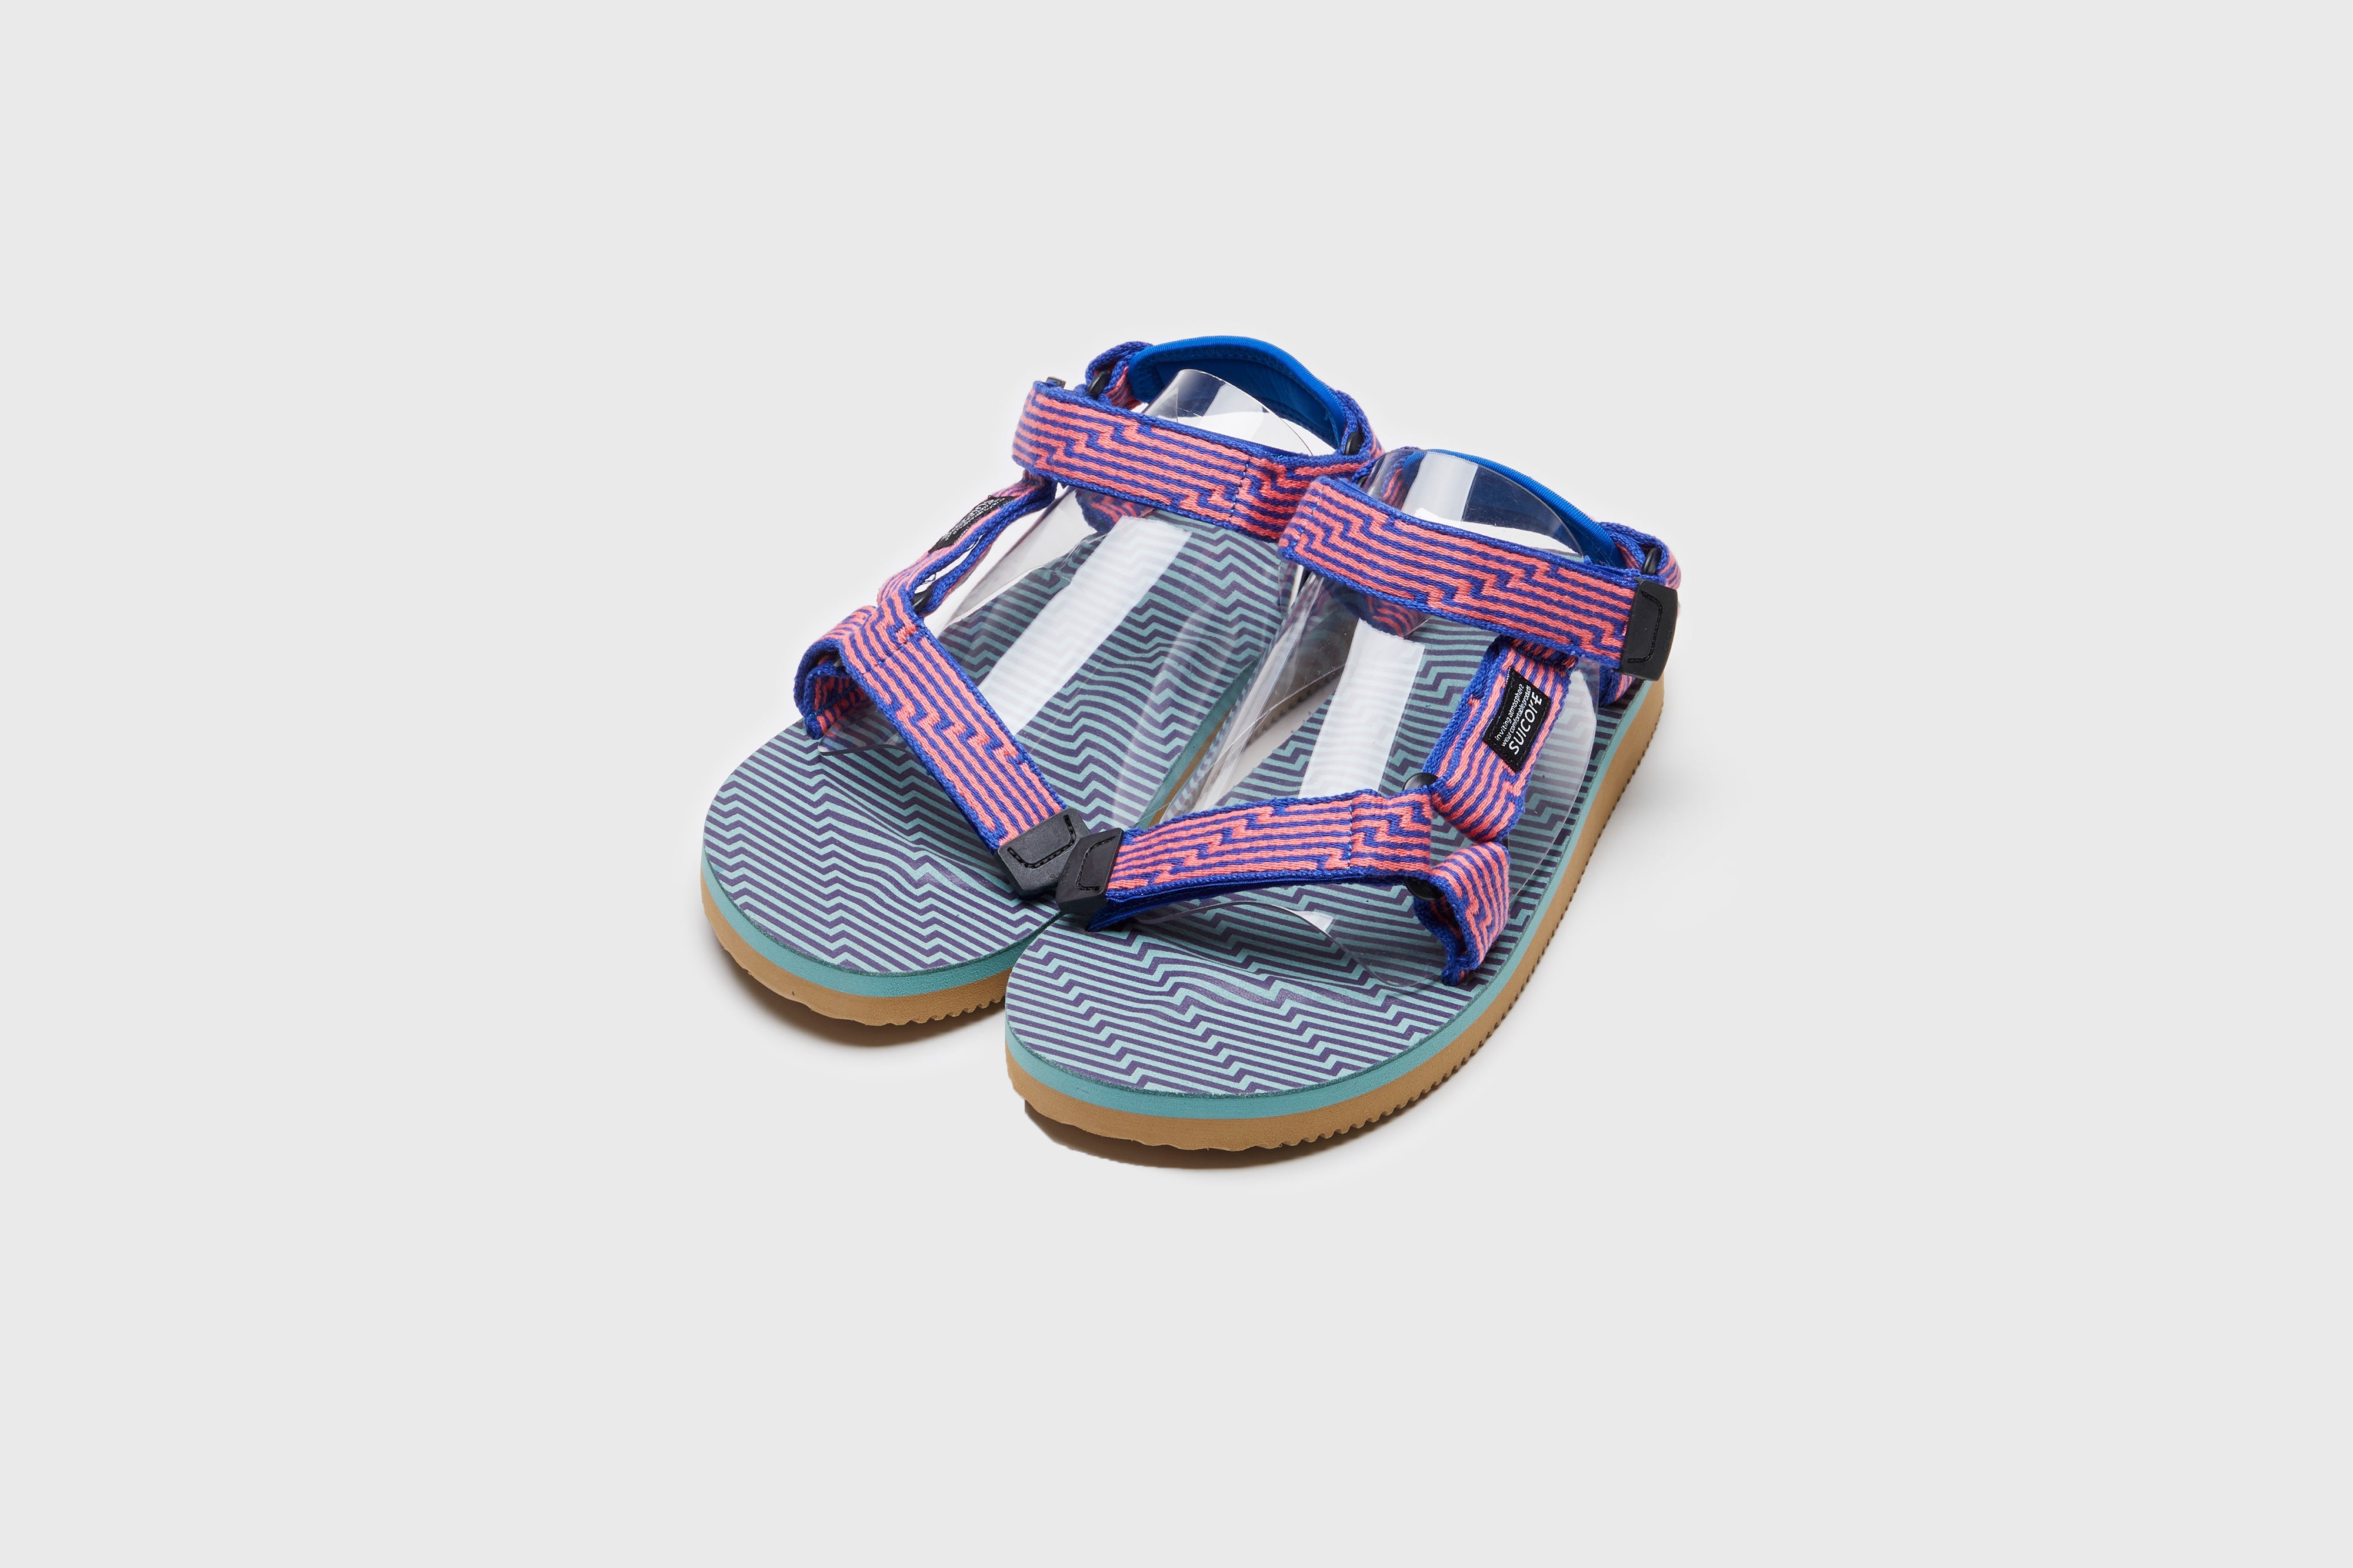 SUICOKE DEPA-JC01 sandals with orange & blue nylon upper, orange & blue midsole and sole, strap and logo patch. From Spring/Summer 2023 collection on eightywingold Web Store, an official partner of SUICOKE. OG-022-JC01 ORANGE X BLUE